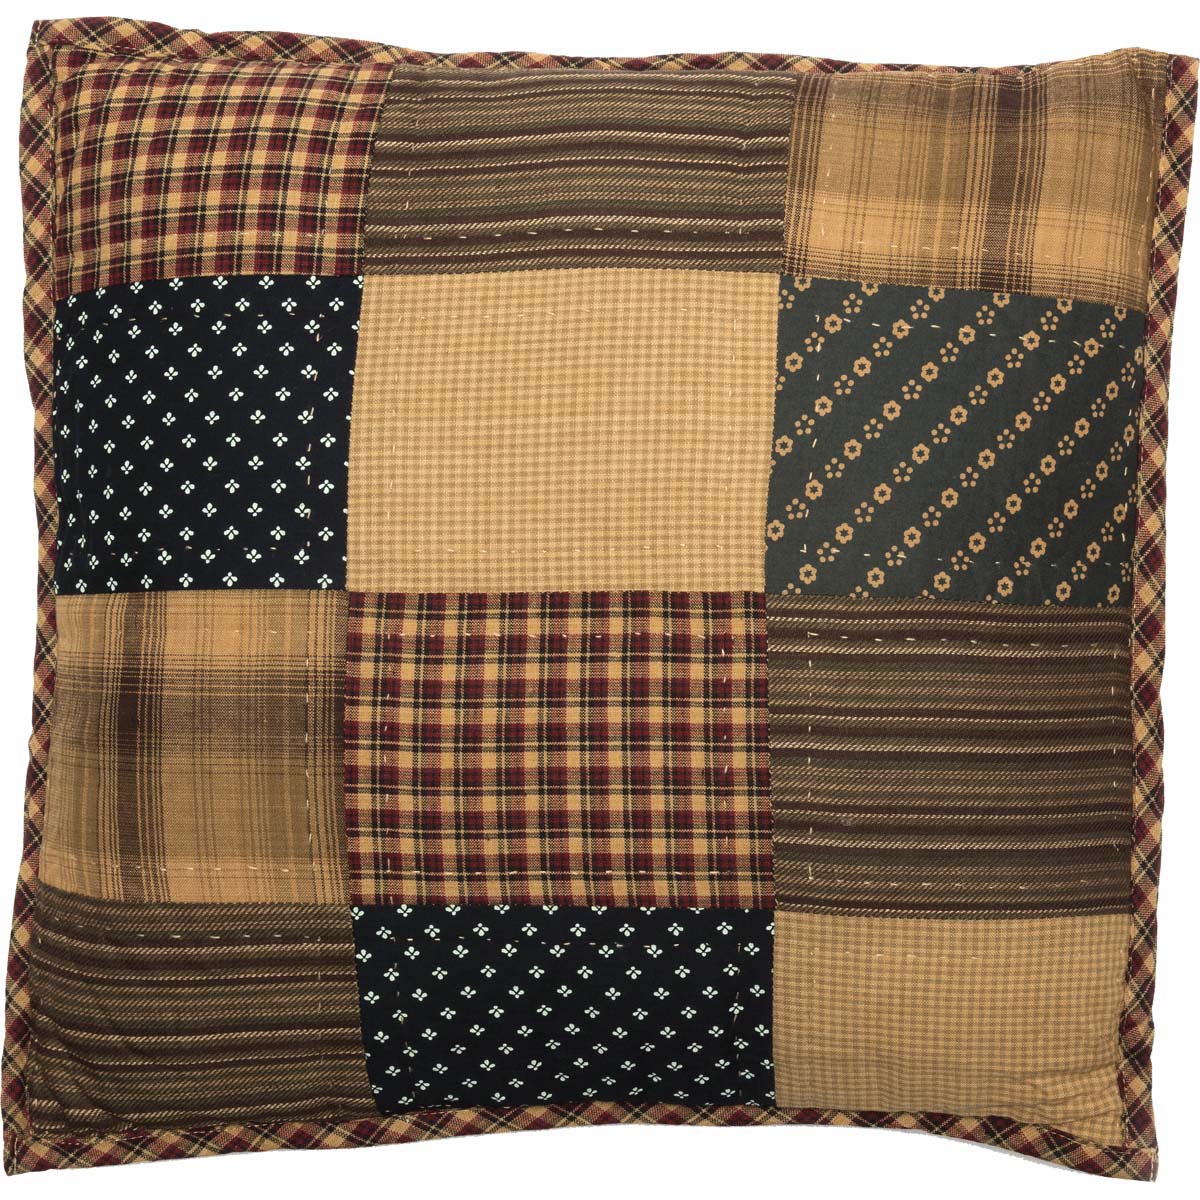 Patriotic Patch Quilted 16" Throw Pillow